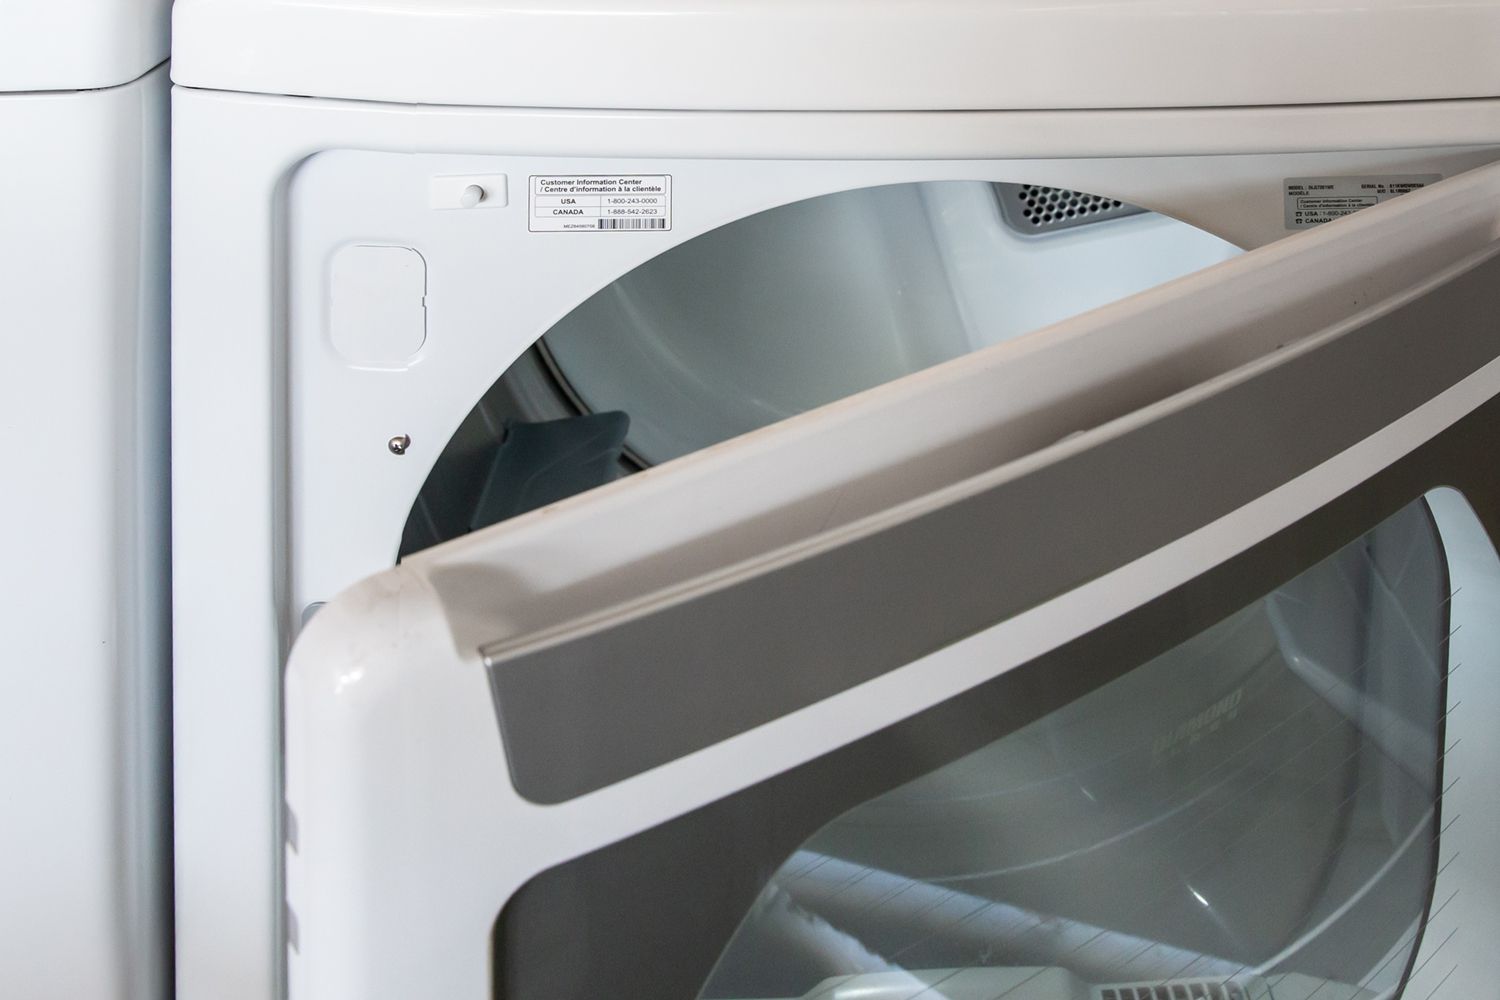 How To Fix The Error Code E79 For GE Dryer